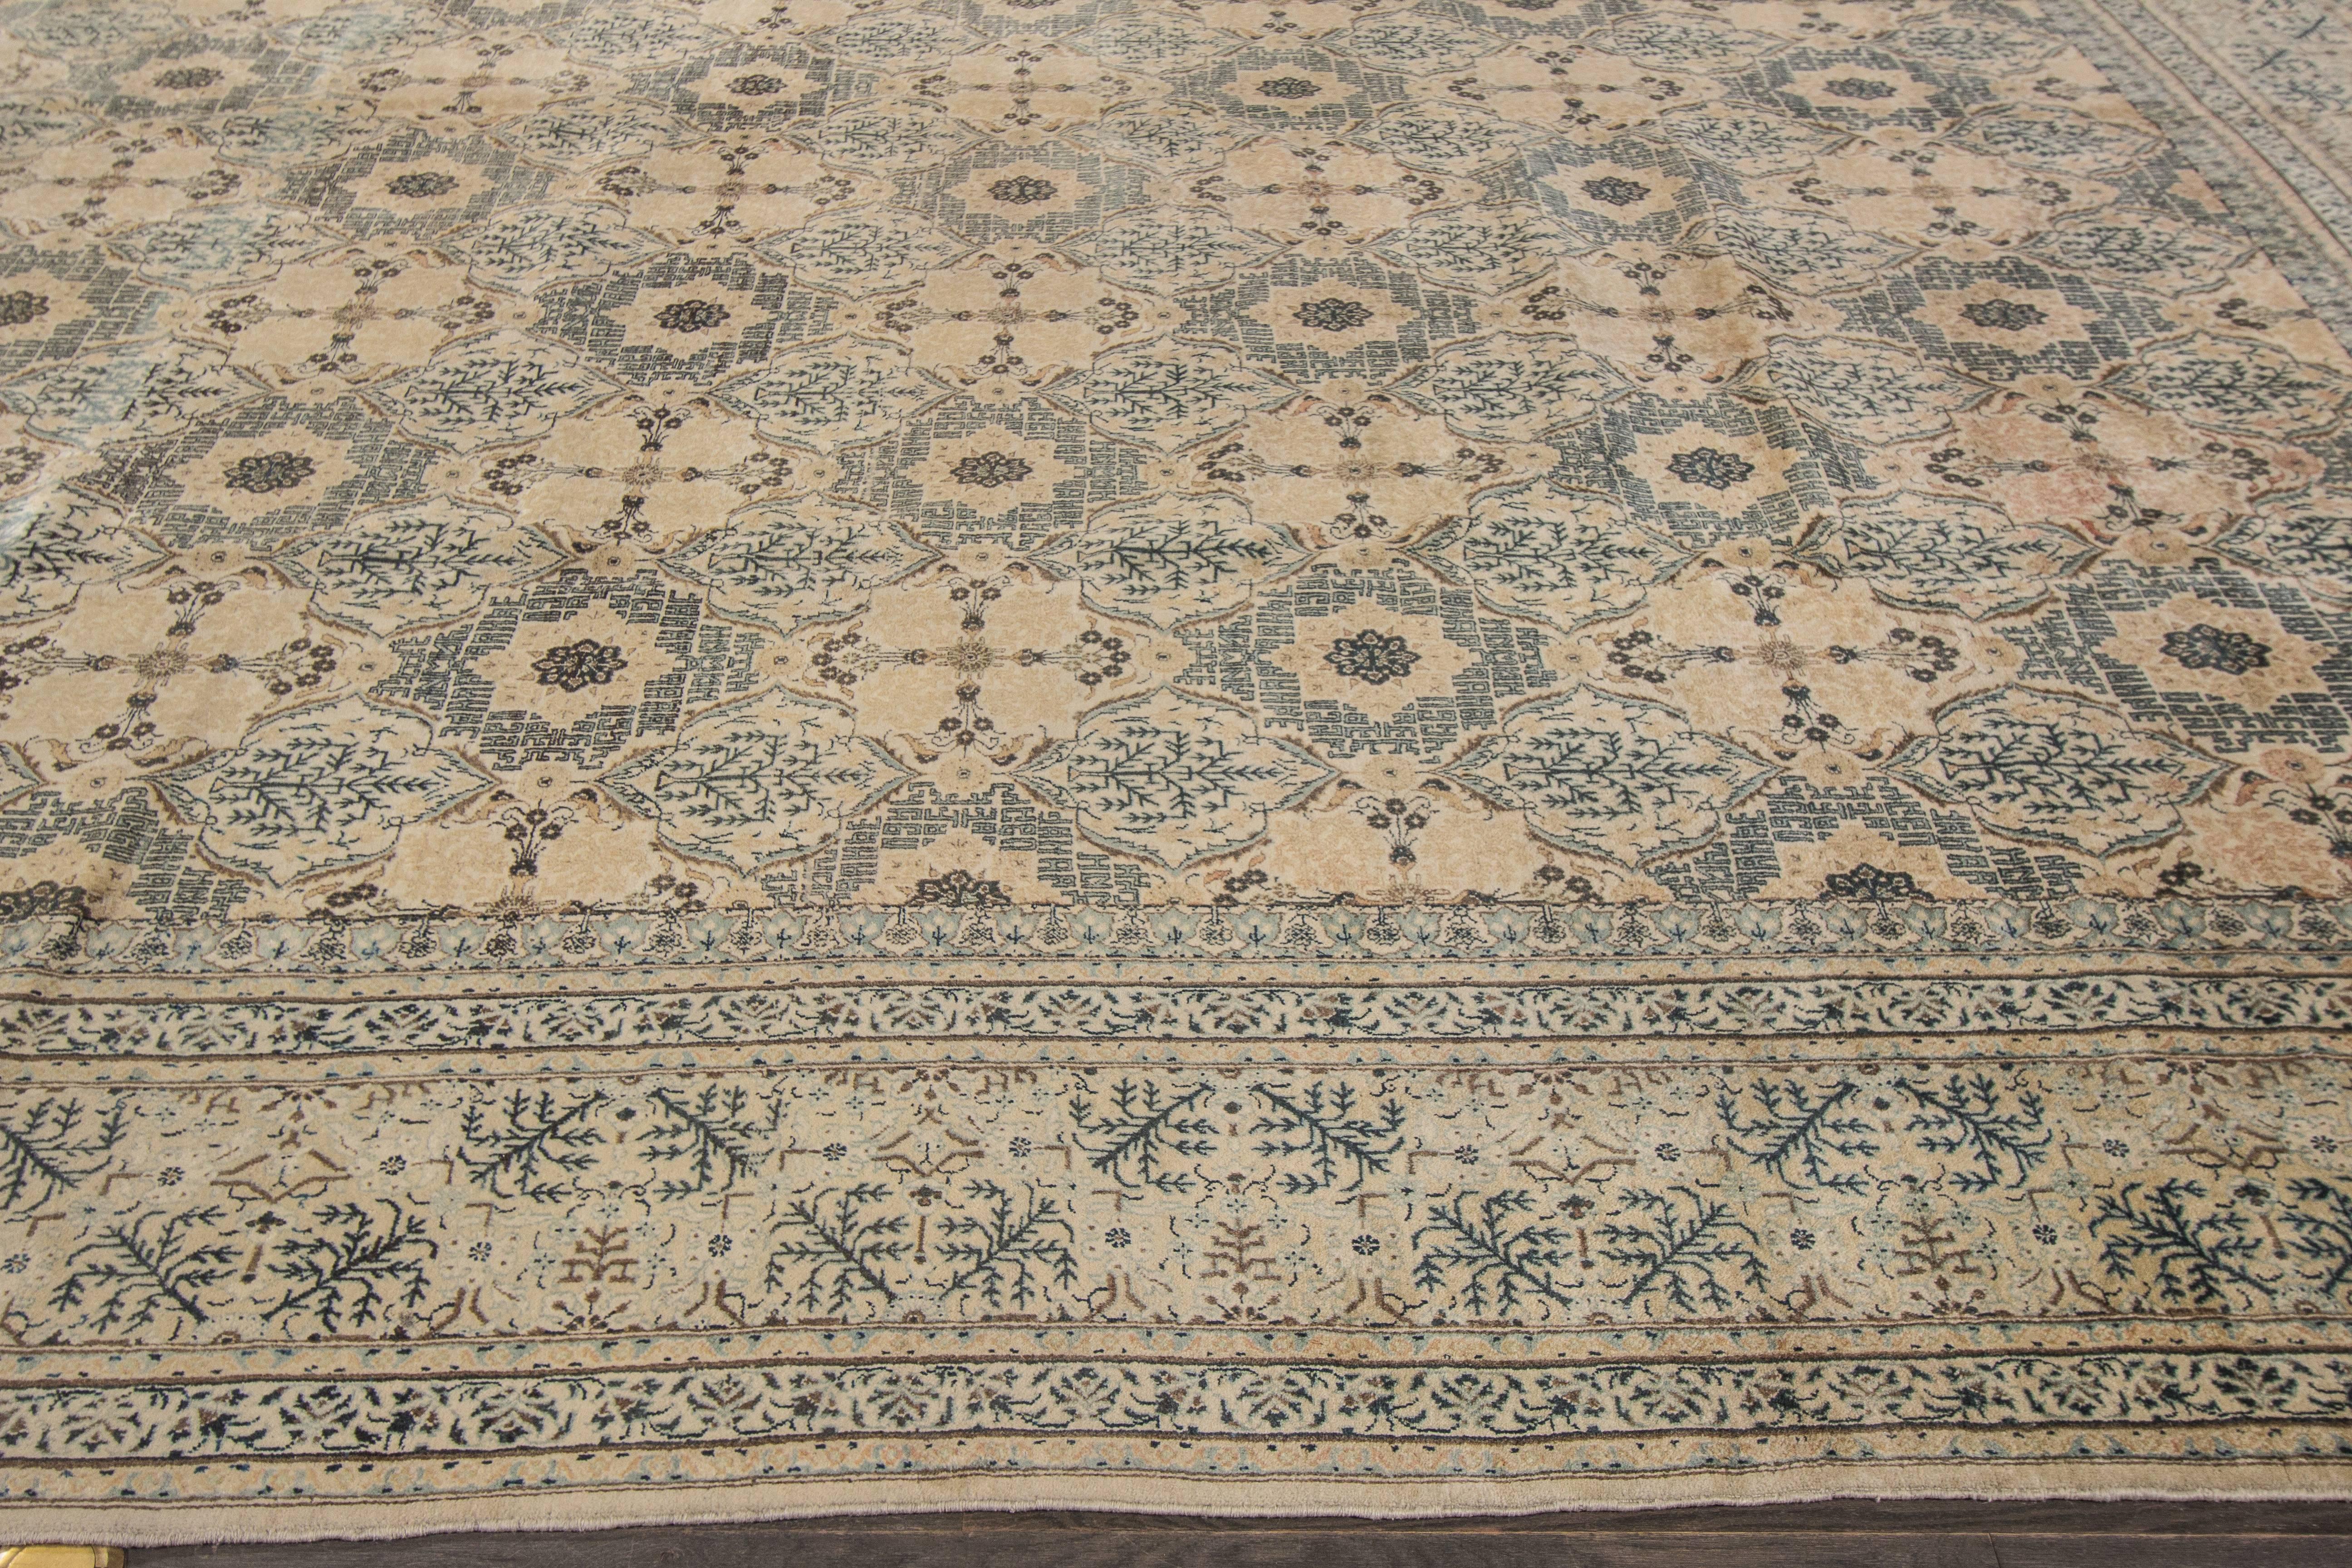 A hand-knotted antique Kashan rug with a floral pattern design on a beige field. Accents of green and brown throughout the piece. The size of this piece is 10'.6 x 14'.